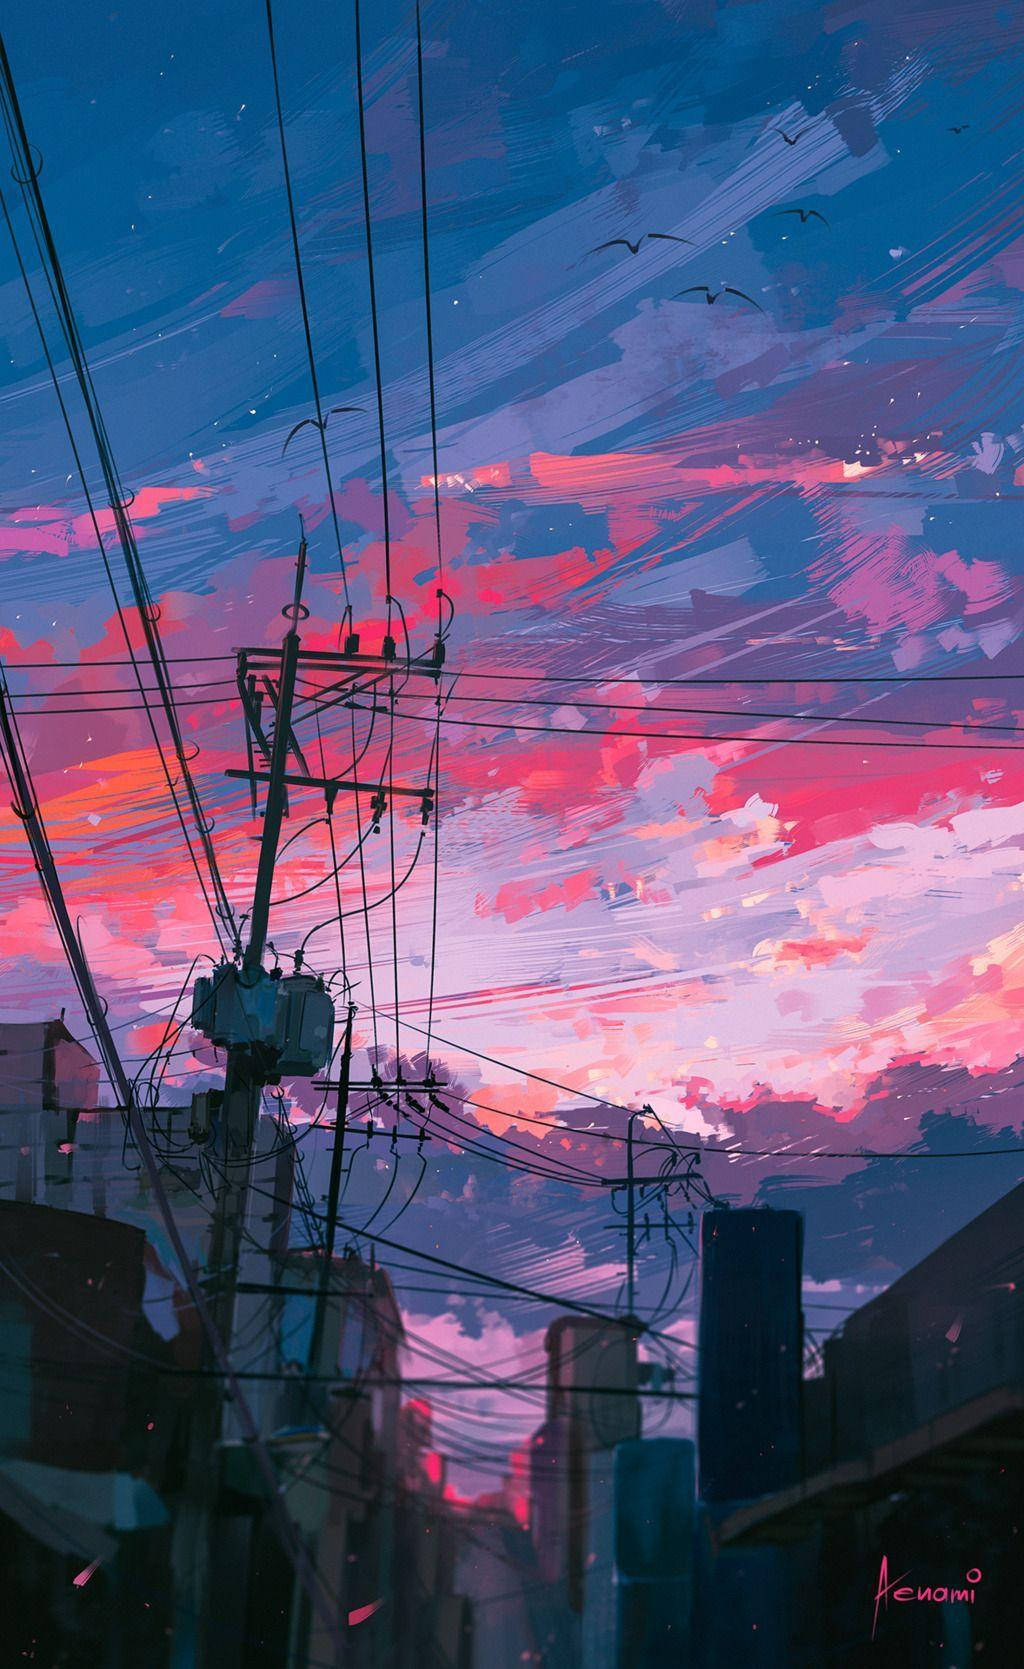 Aesthetic City With Electrical Wires